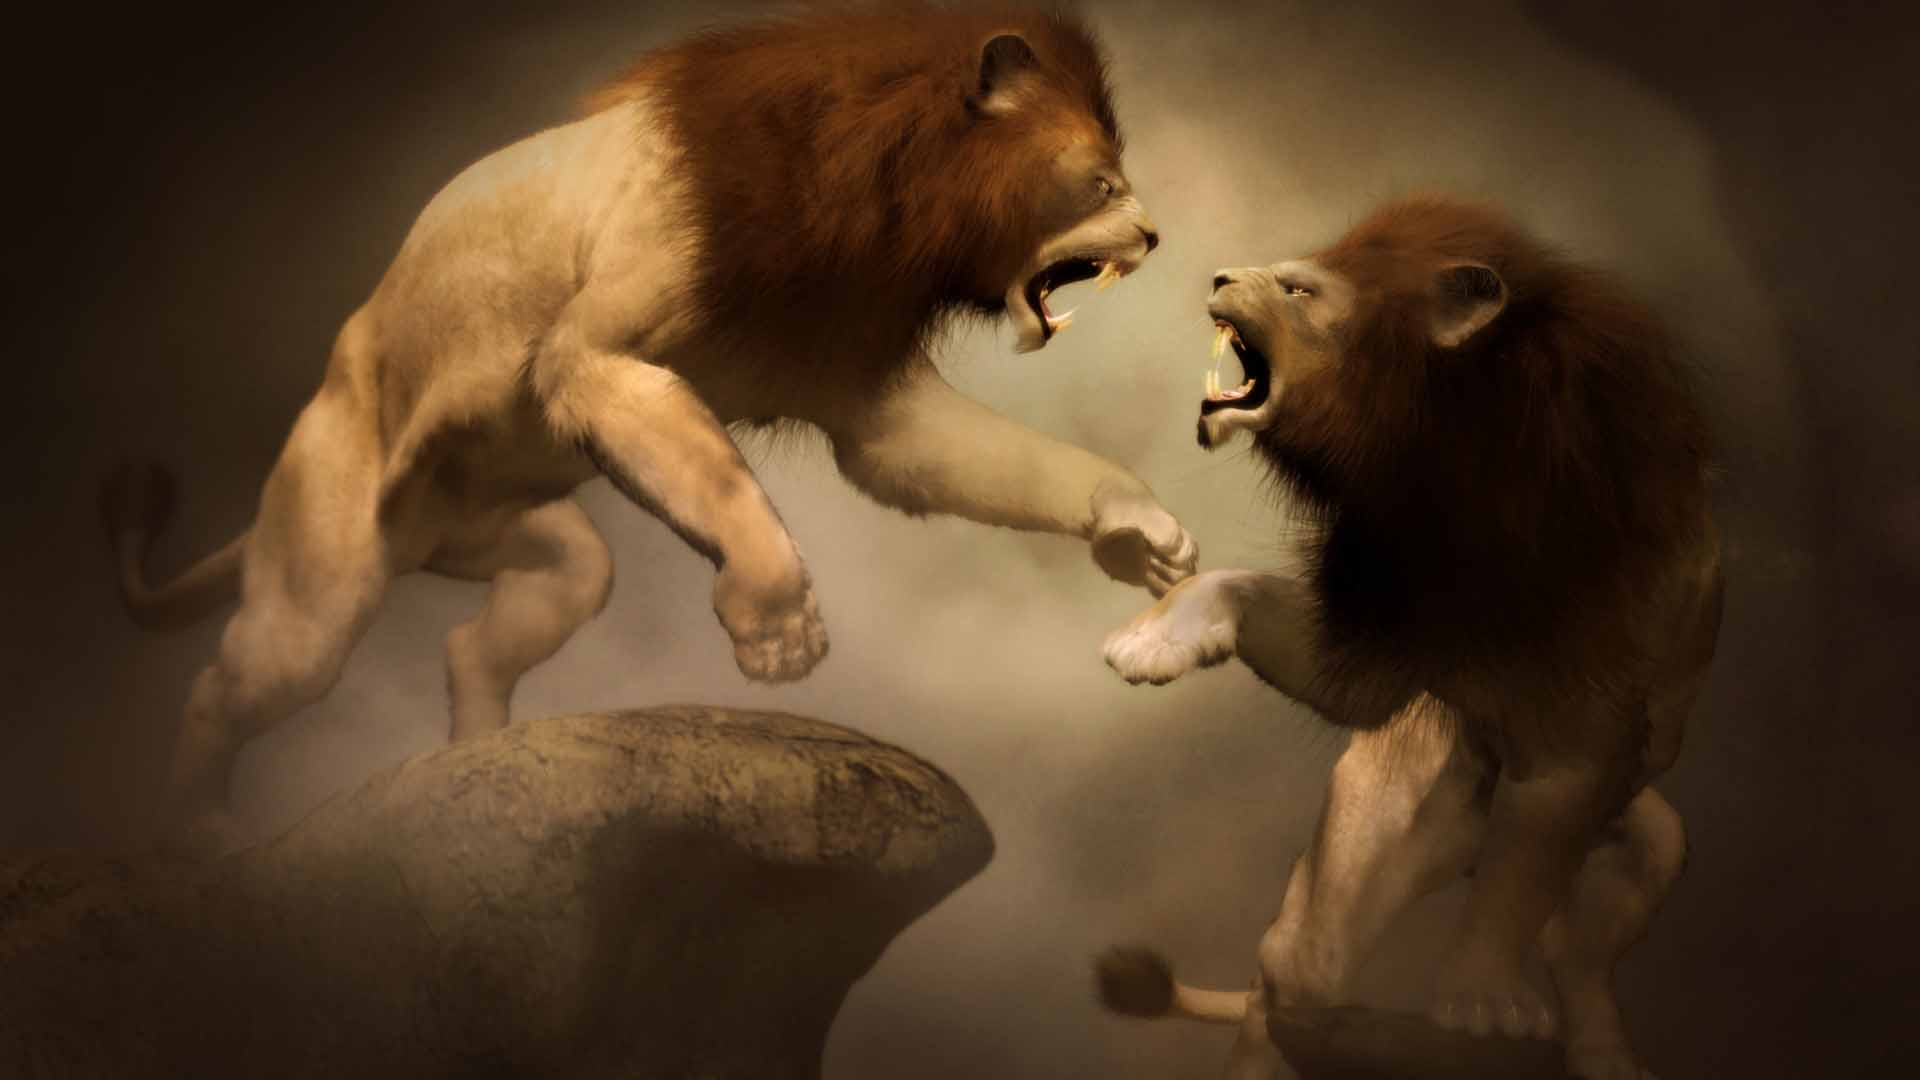 Lions Fighting - Two Lions Fighting Drawing - HD Wallpaper 